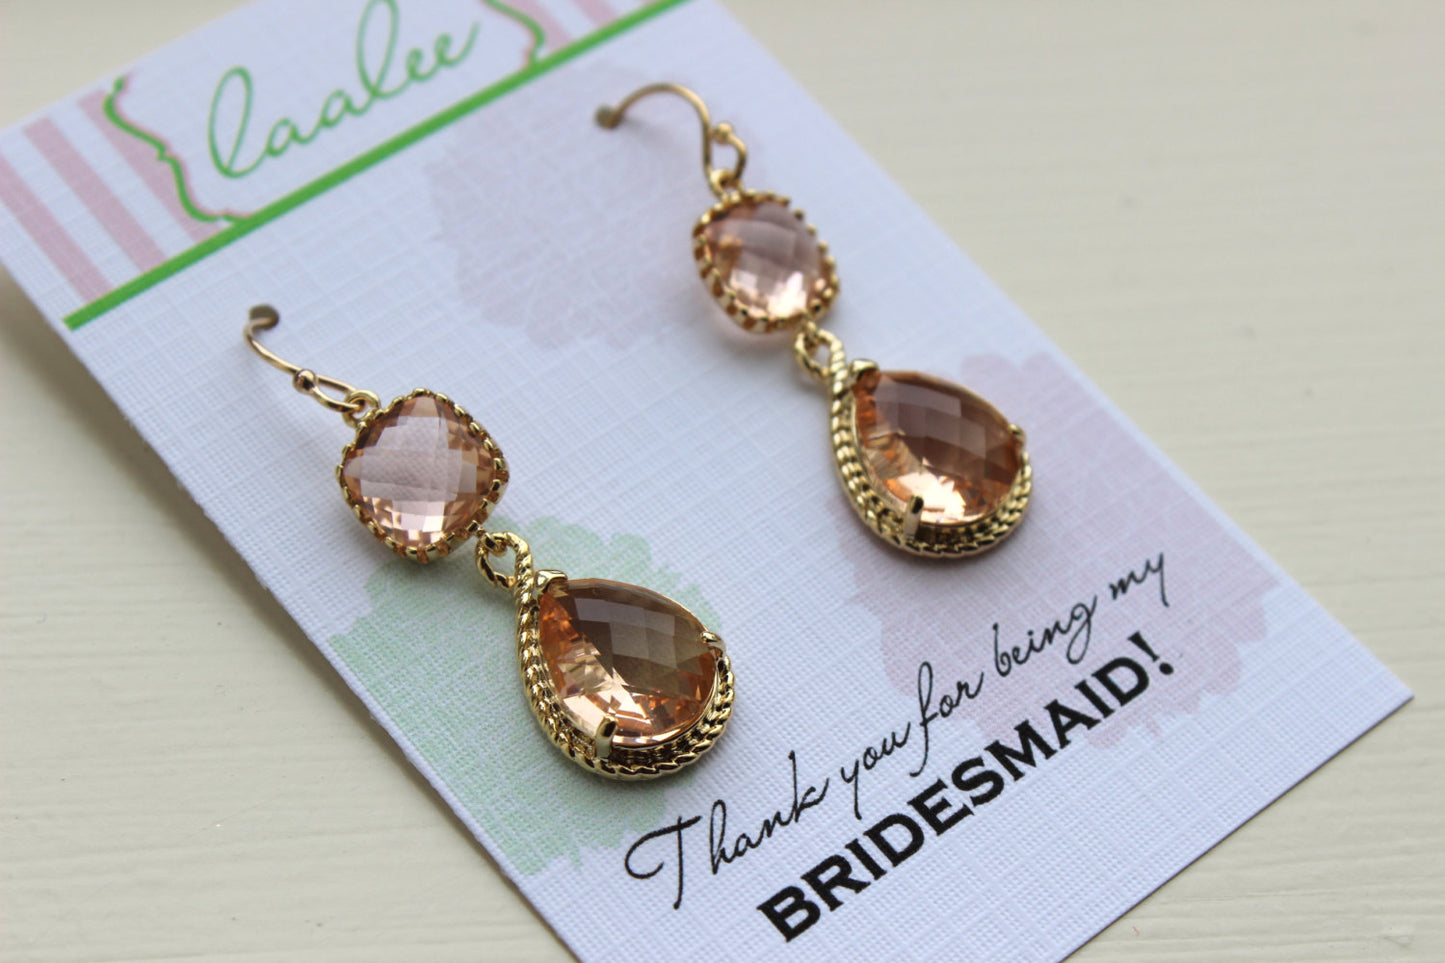 Gold Blush Earrings Two Tiered - Champagne Peach Wedding Jewelry - Pink Blush Bridesmaid Earrings Gift Peach Bridal Jewelry - Gift Under 35